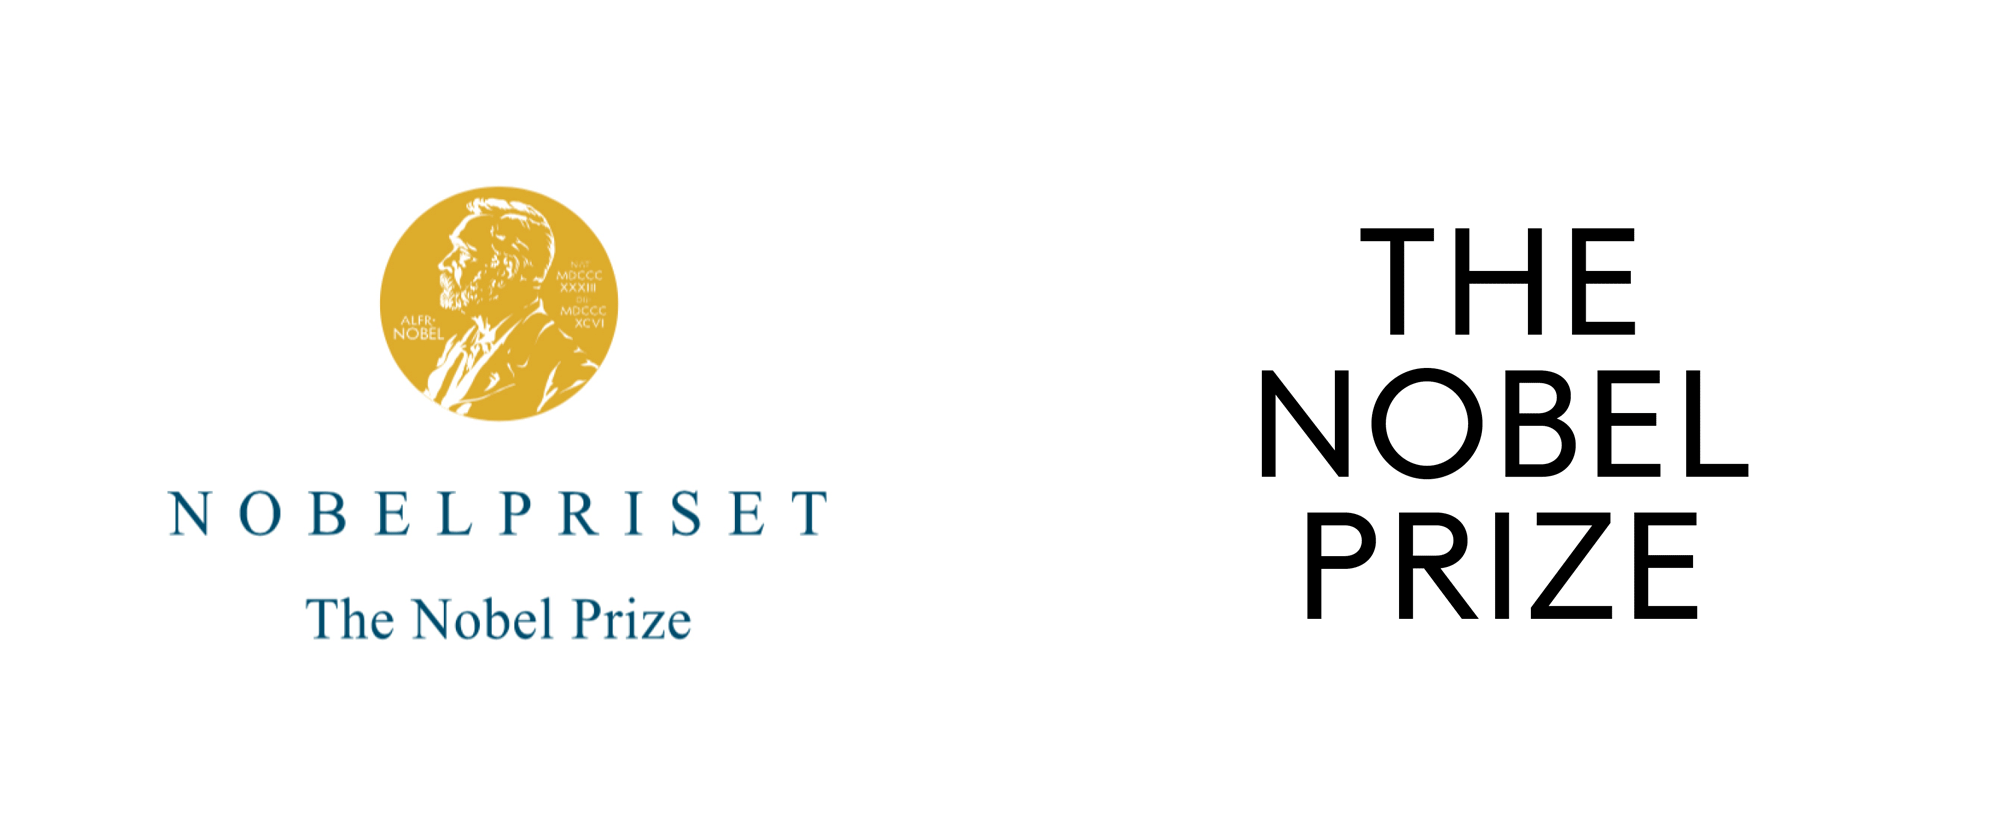 New Logo and Identity for The Nobel Prize by Stockholm Design Lab